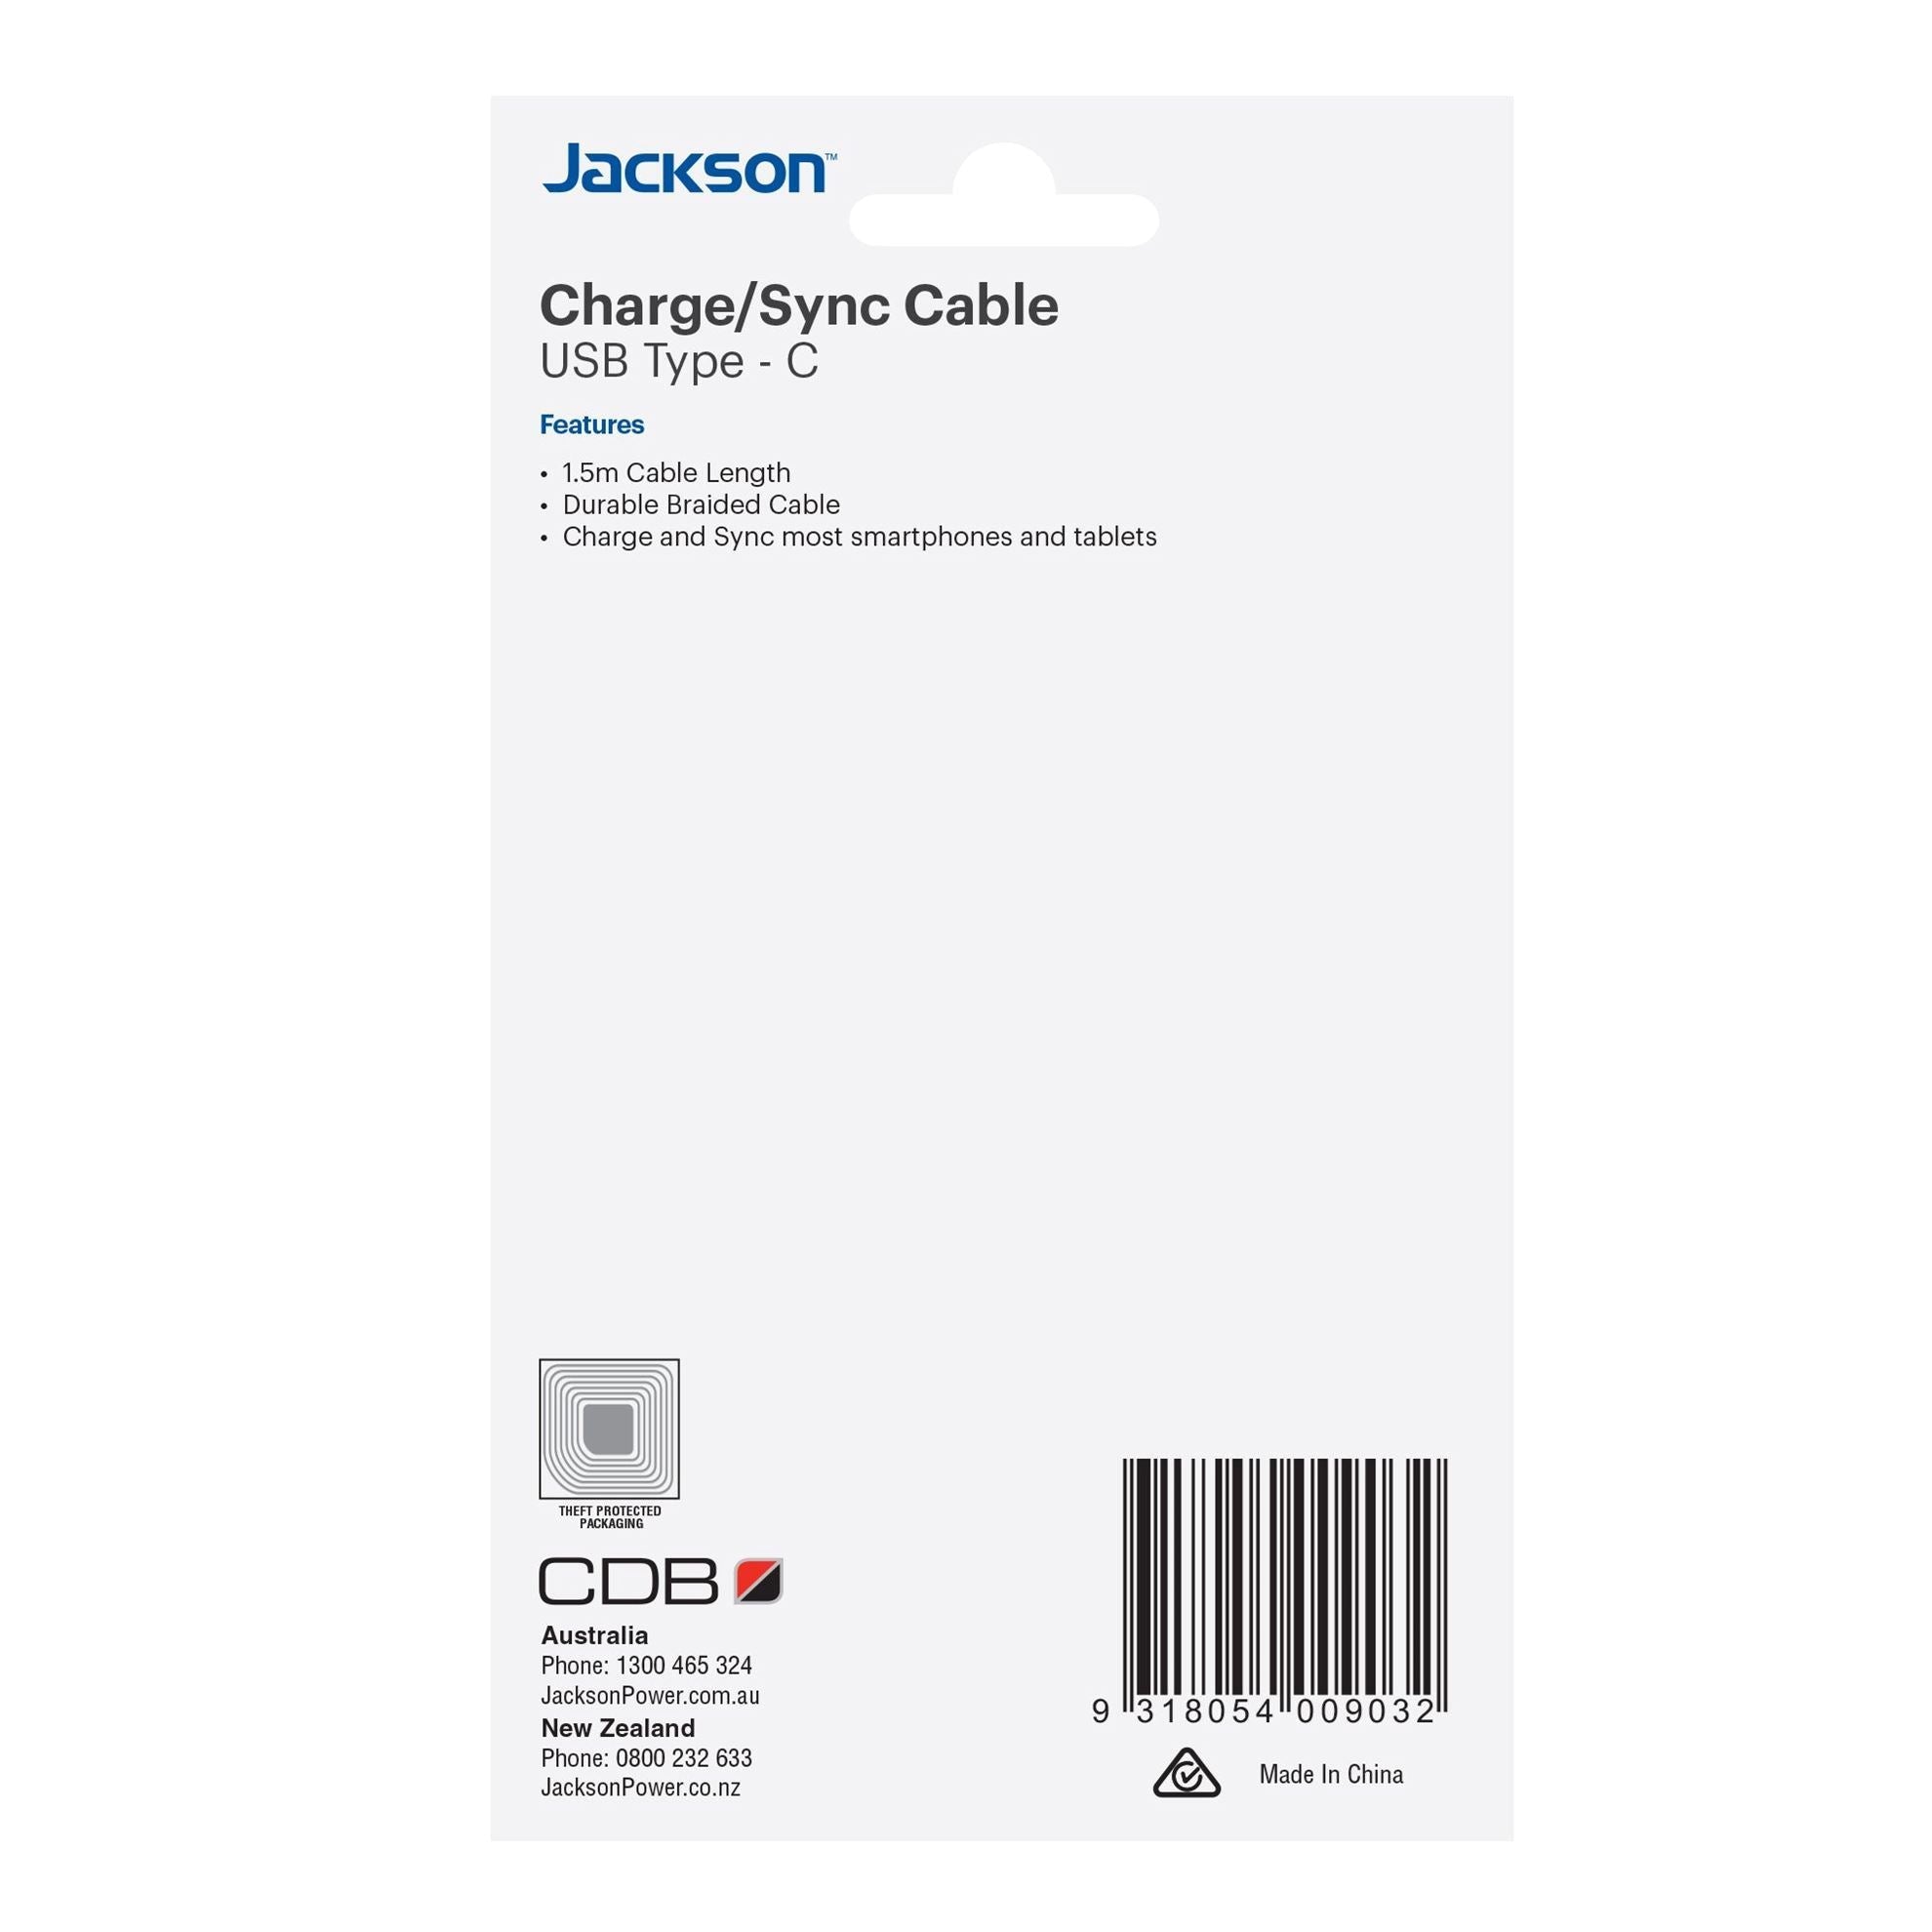 JACKSON_1.5m_USB-A_to_USB-C_Sync_&_Charge_Cable._Braided_Cable_Provides_Extra_Durability,_Black_Colour. 161